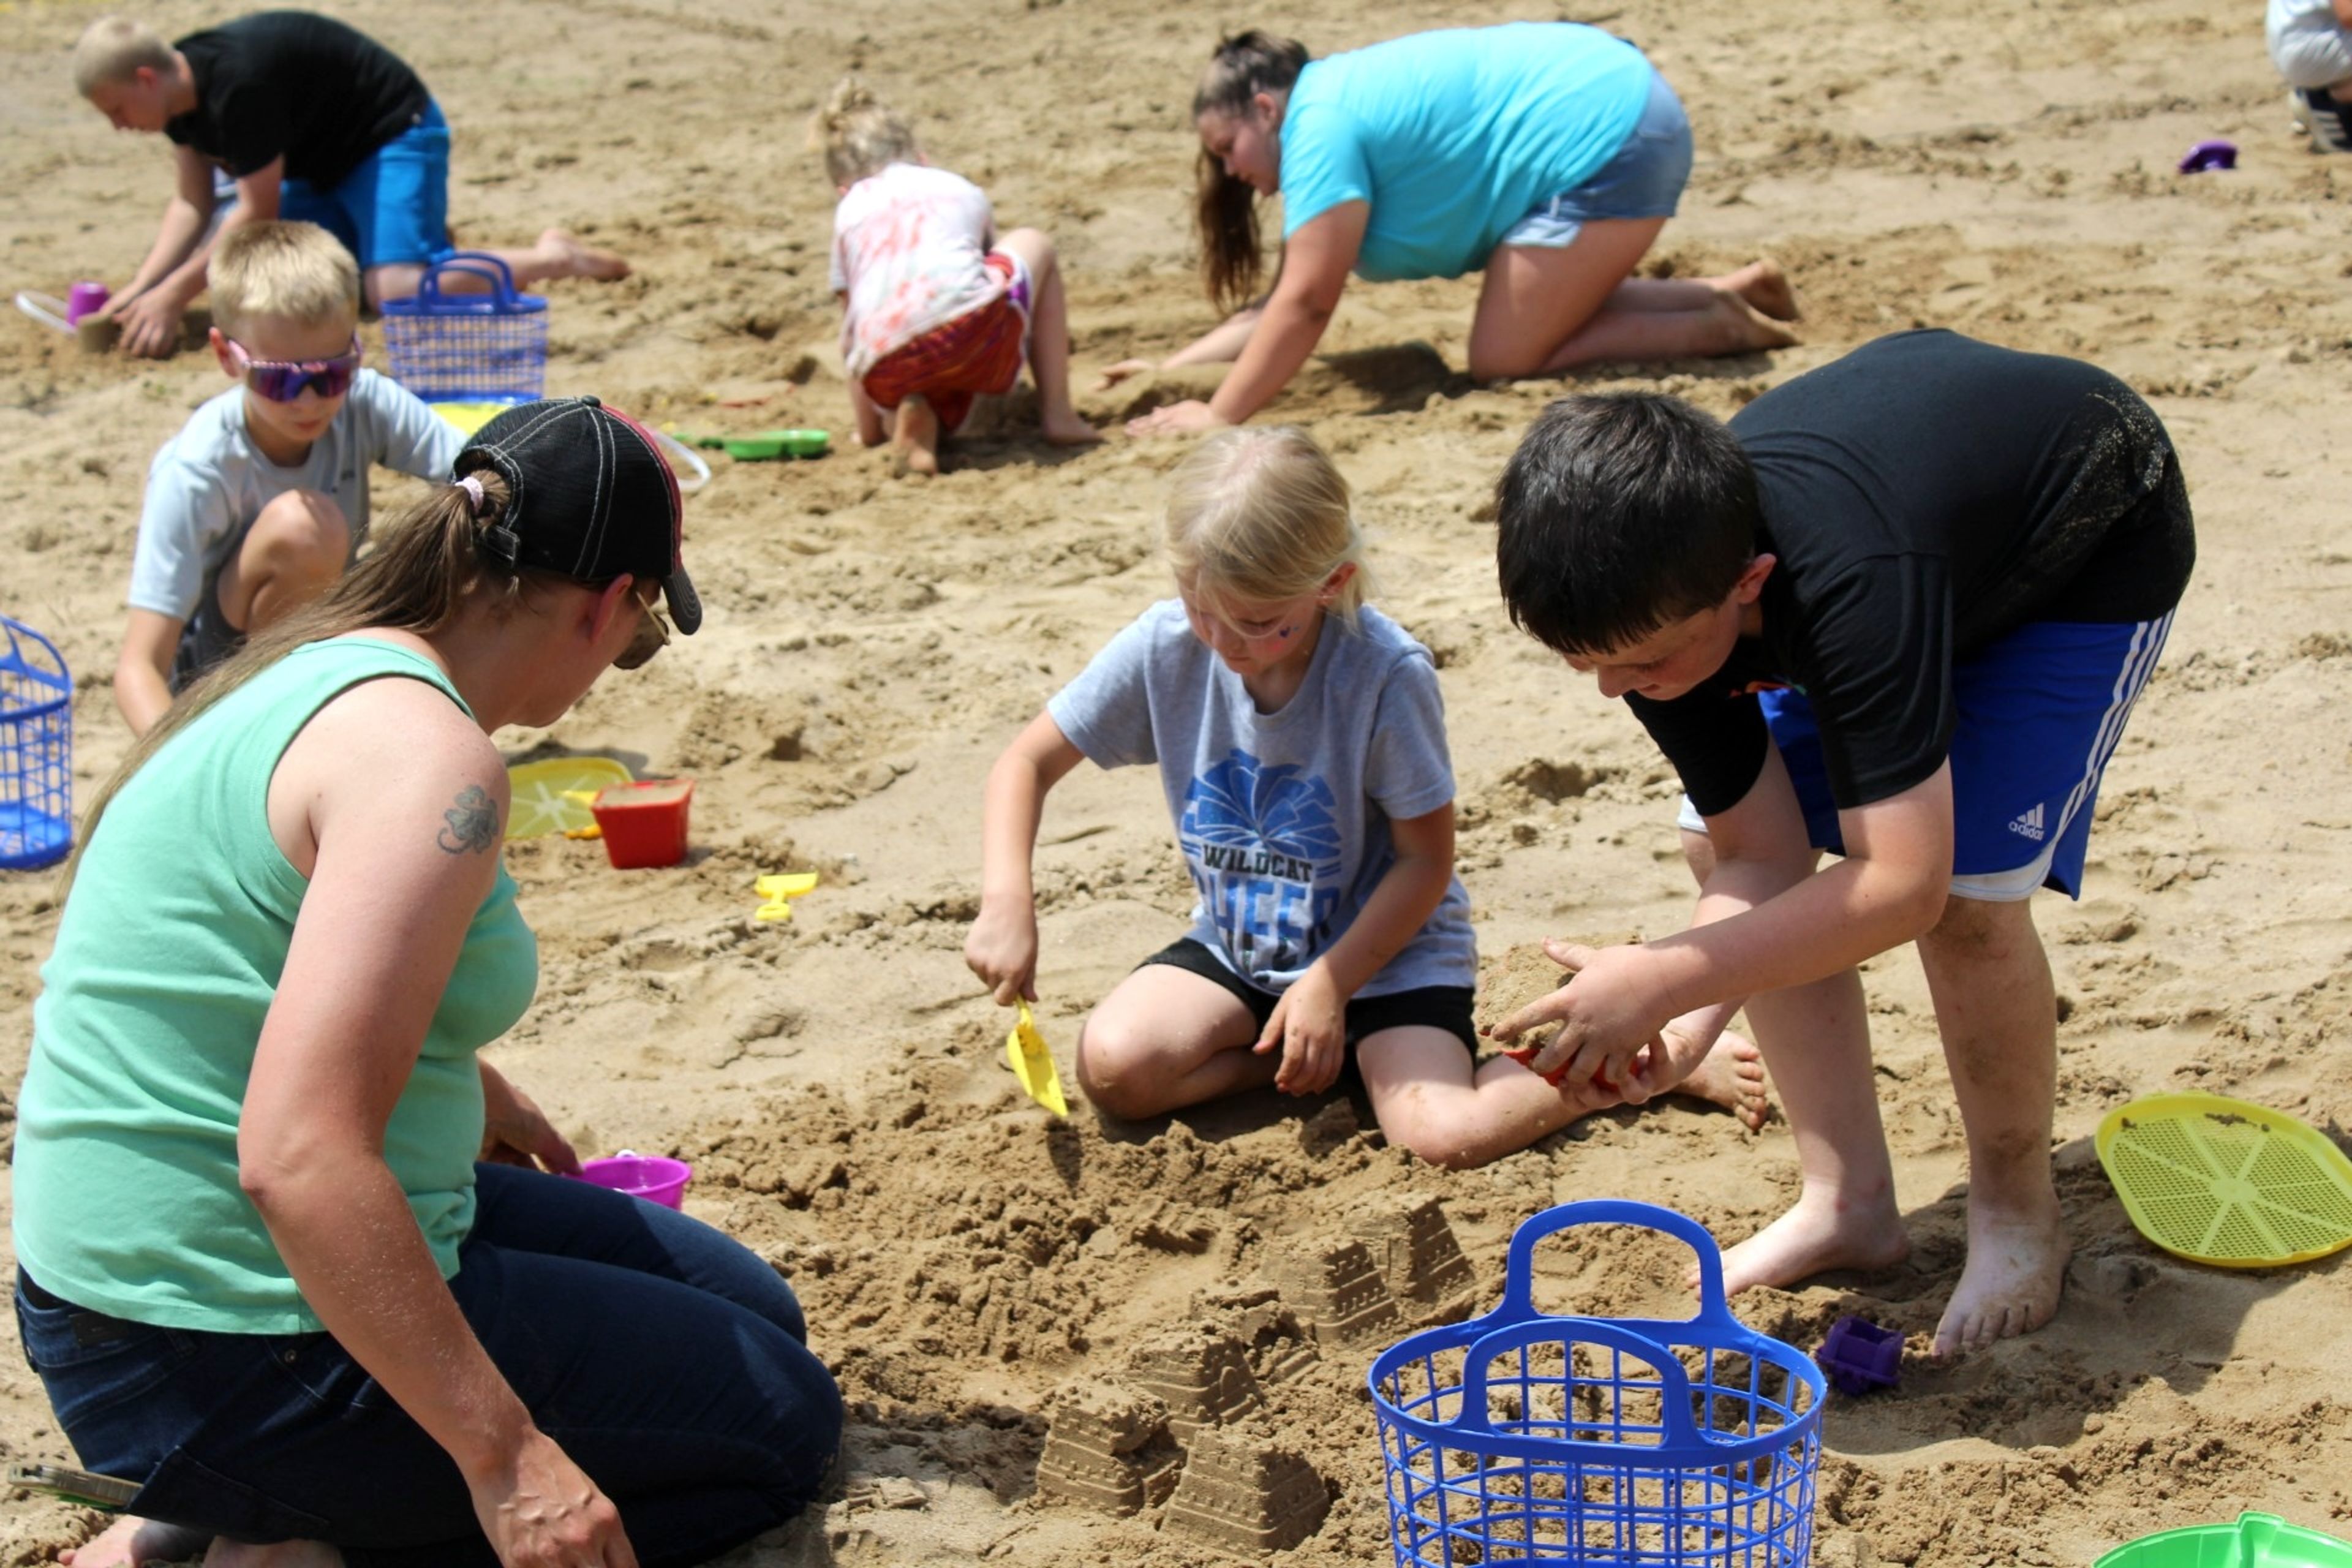 
Sarah McWilliams competes in the sand castle building competition with kids Aubrey and Leland.